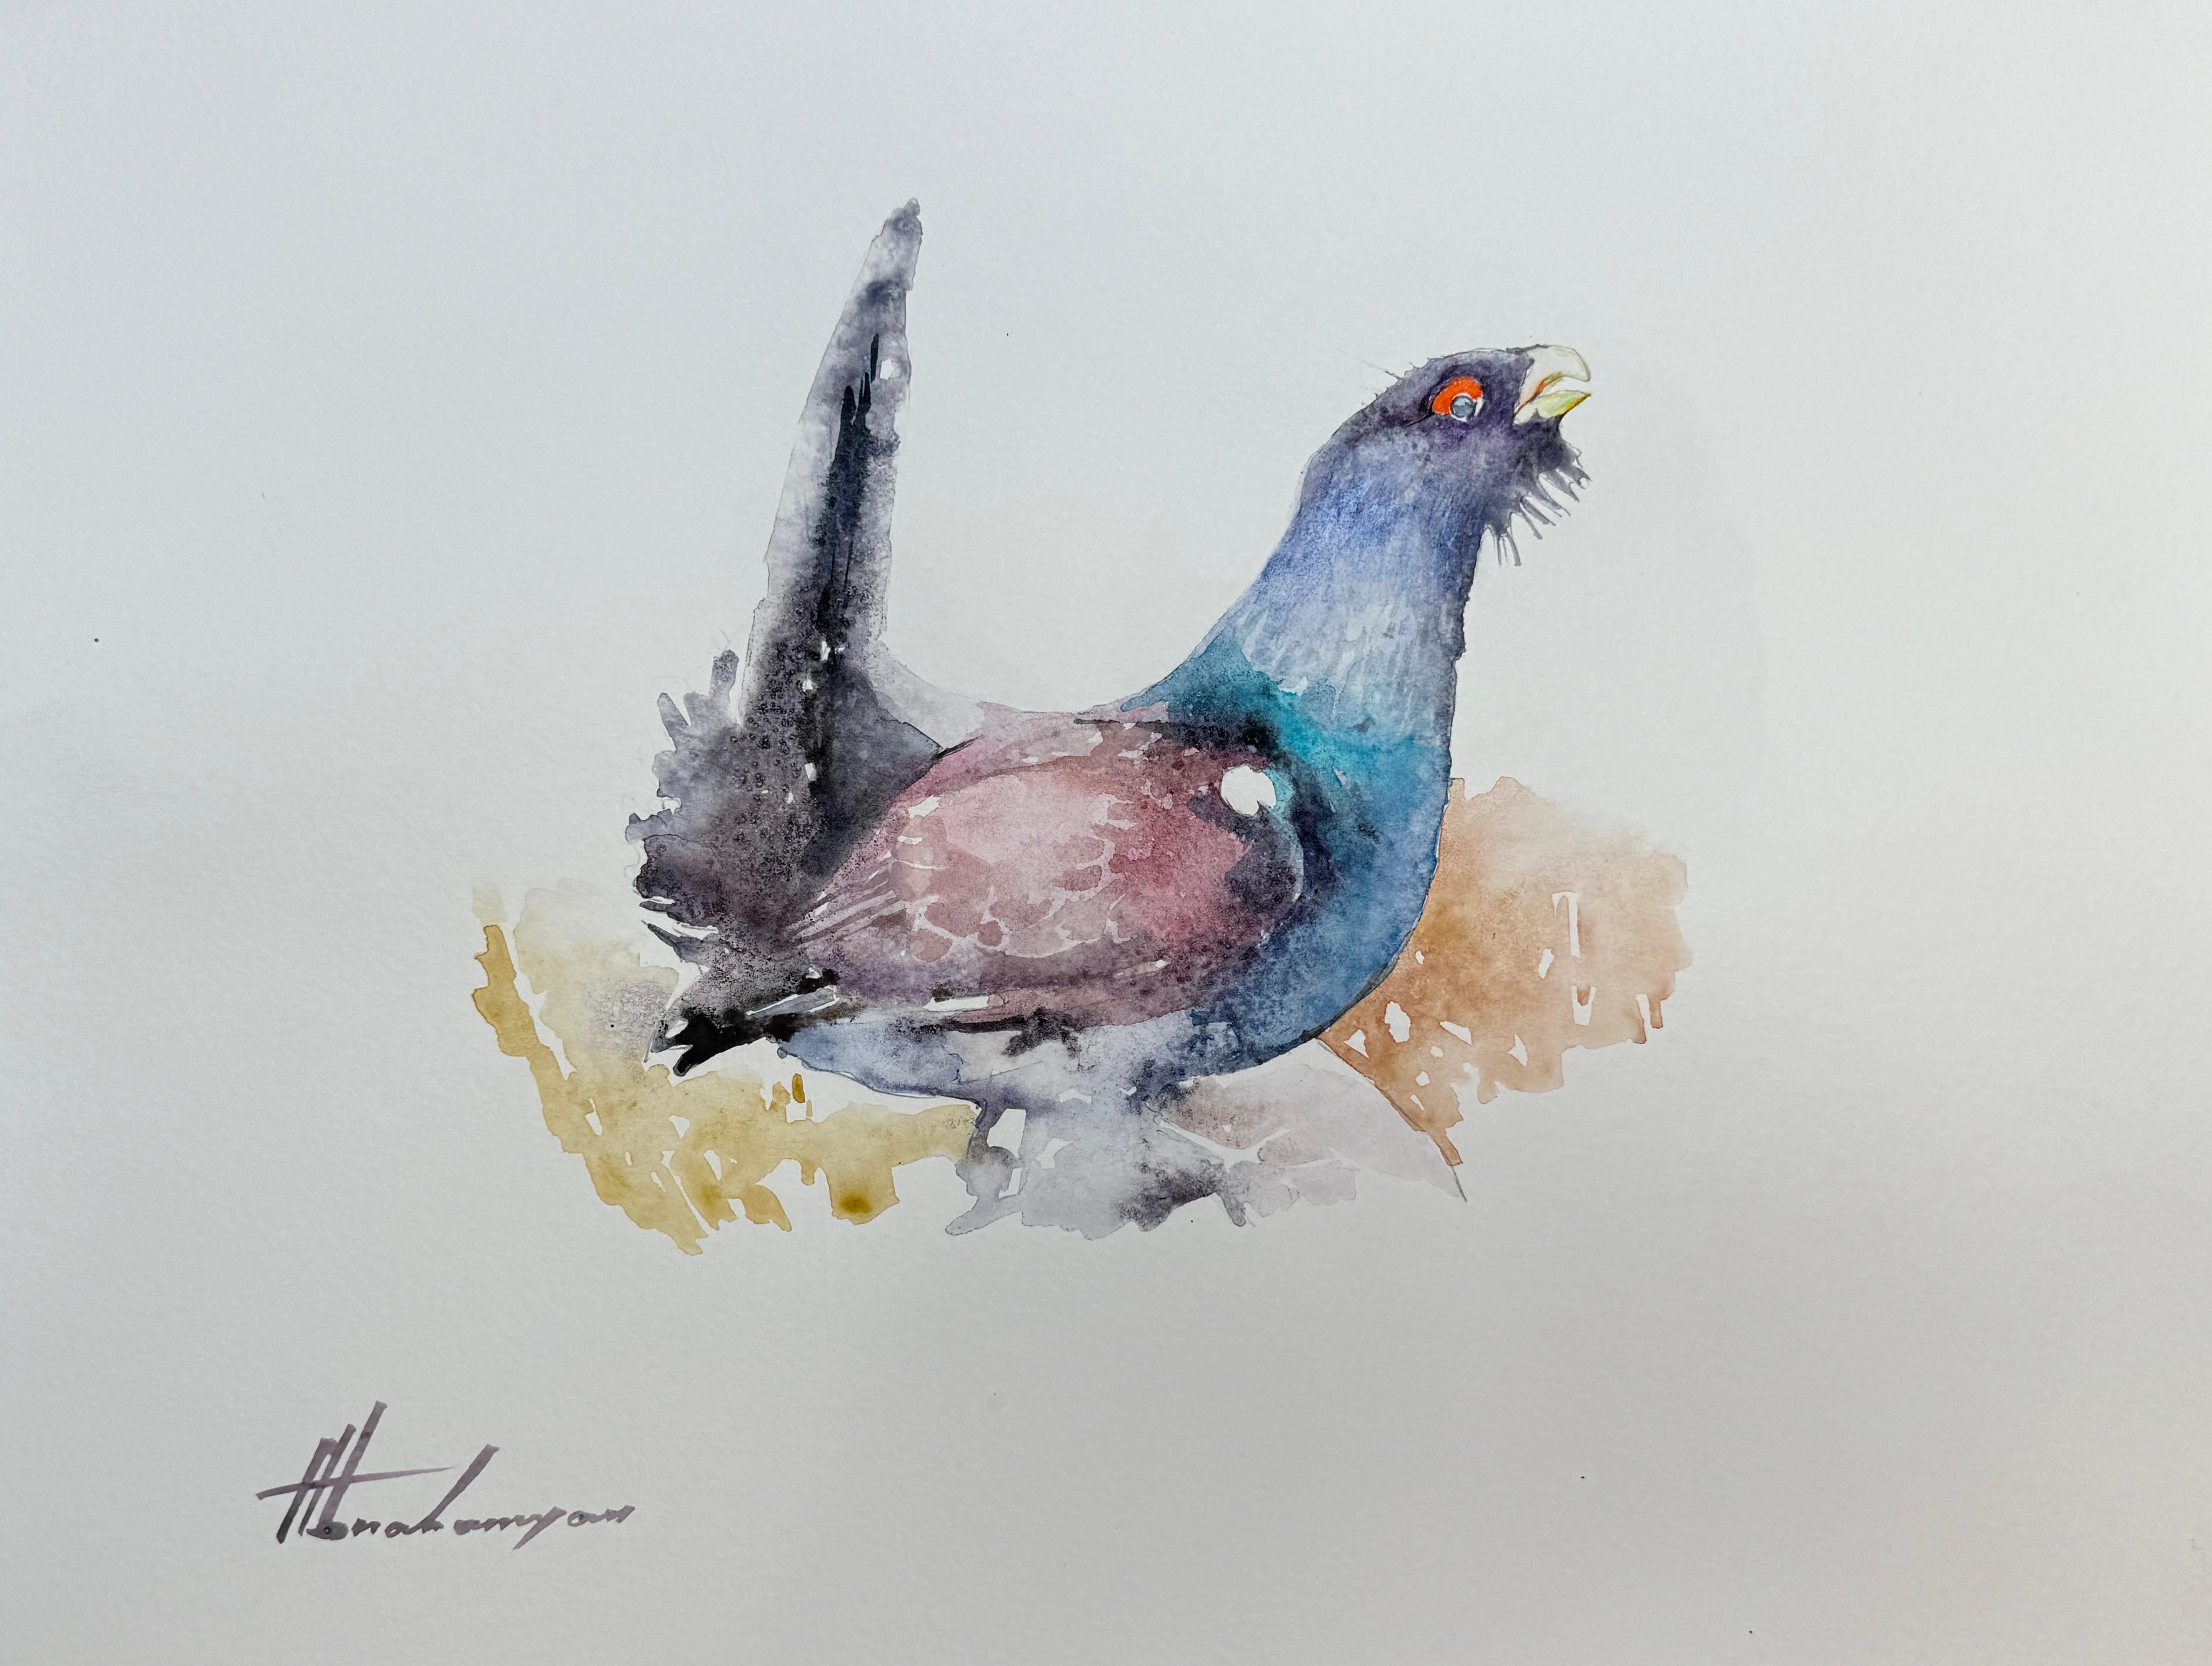 Artyom Abrahamyan Animal Art - Capercaillie, Bird, Watercolor on Paper, Handmade Painting, One of a Kind